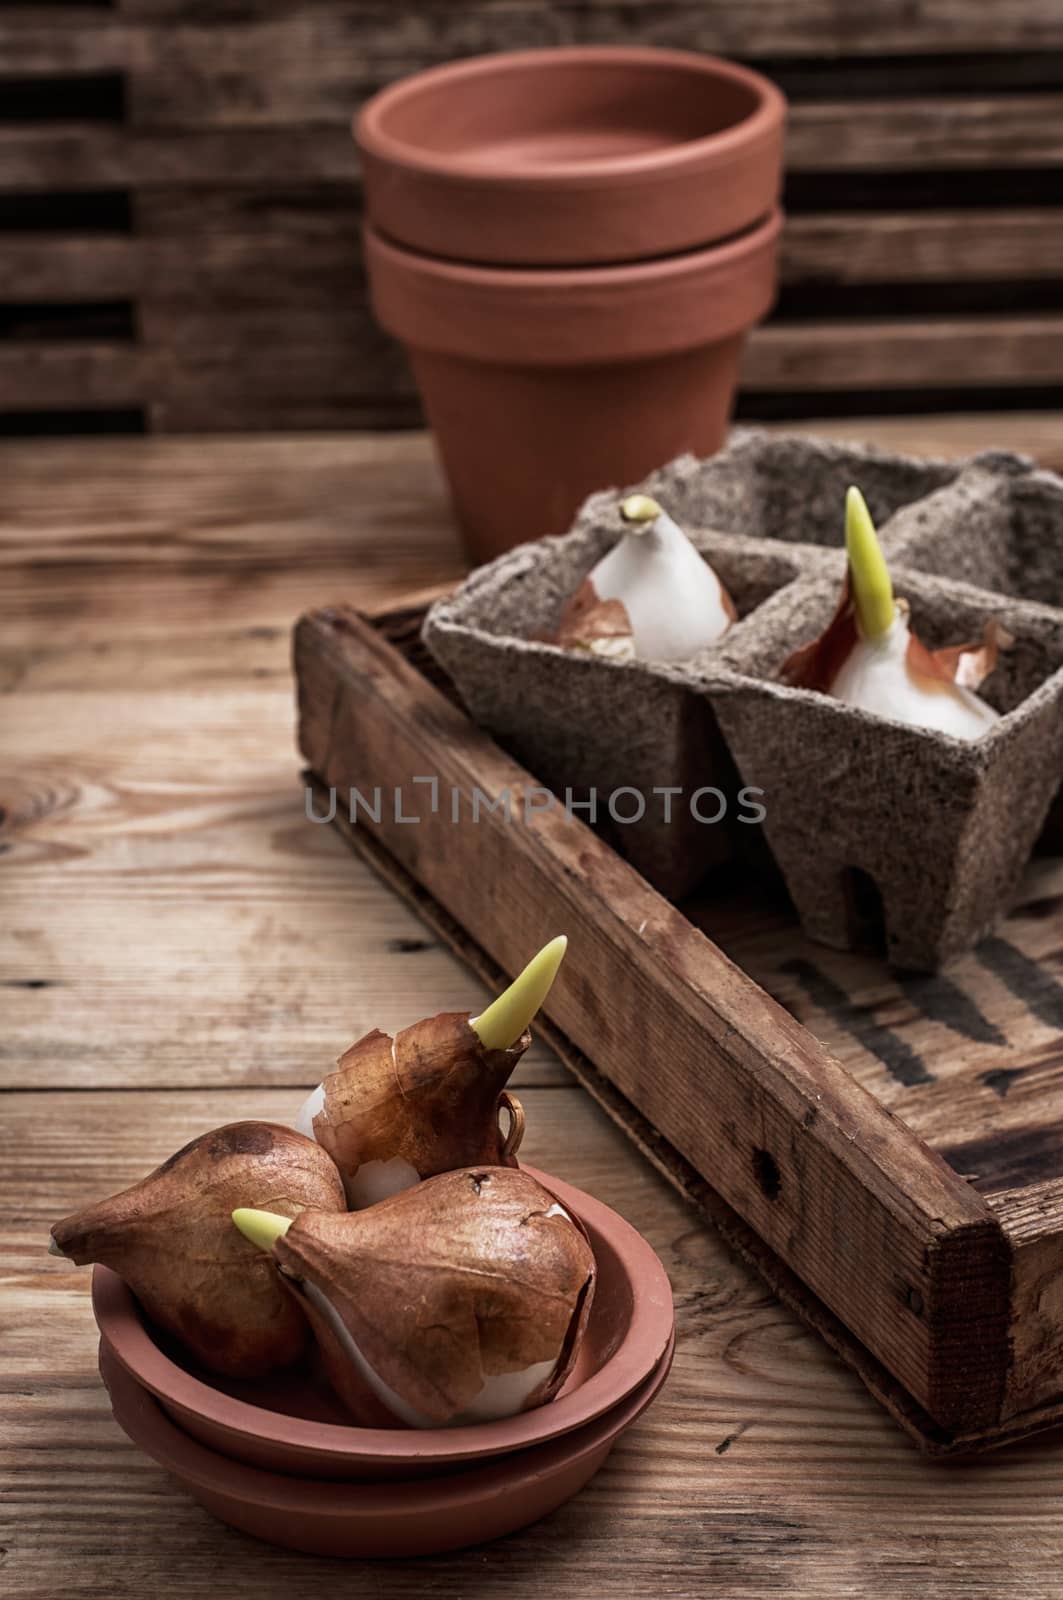 shoots of tulips germinated in the spring tulips with agricultural accessories